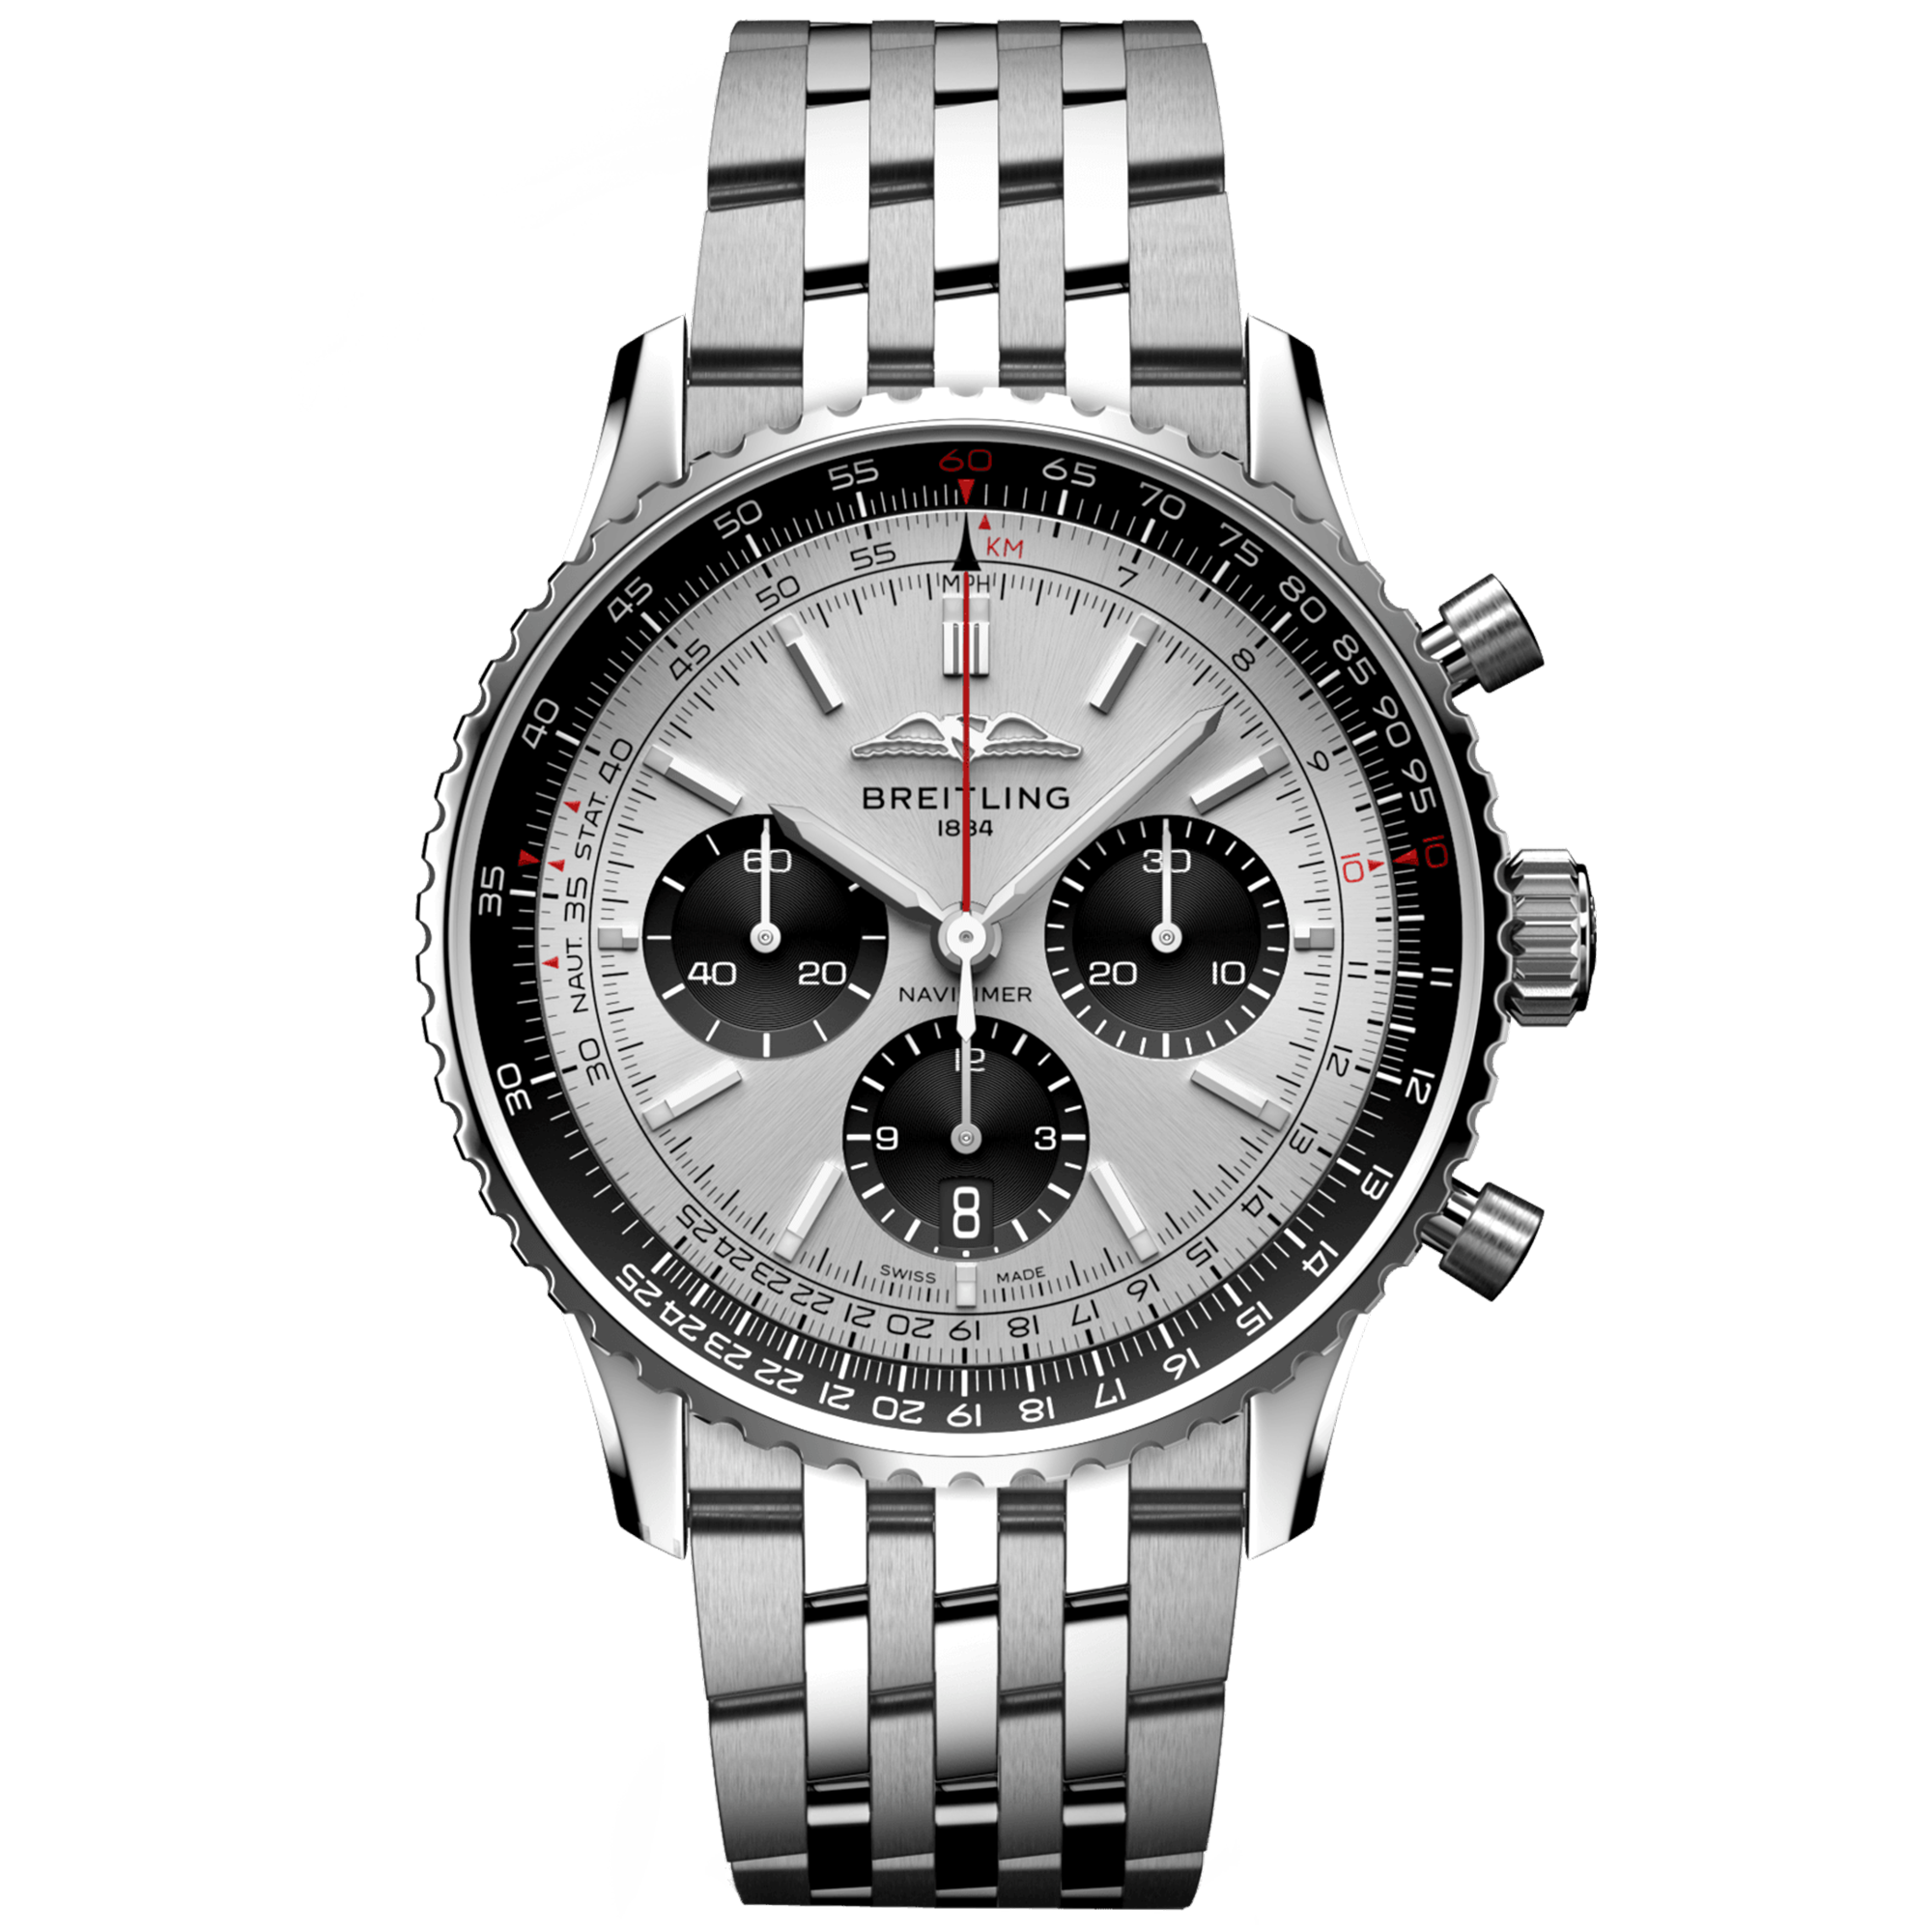 Navitimer 43mm Silver/Black Dial Automatic Chronograph Watch